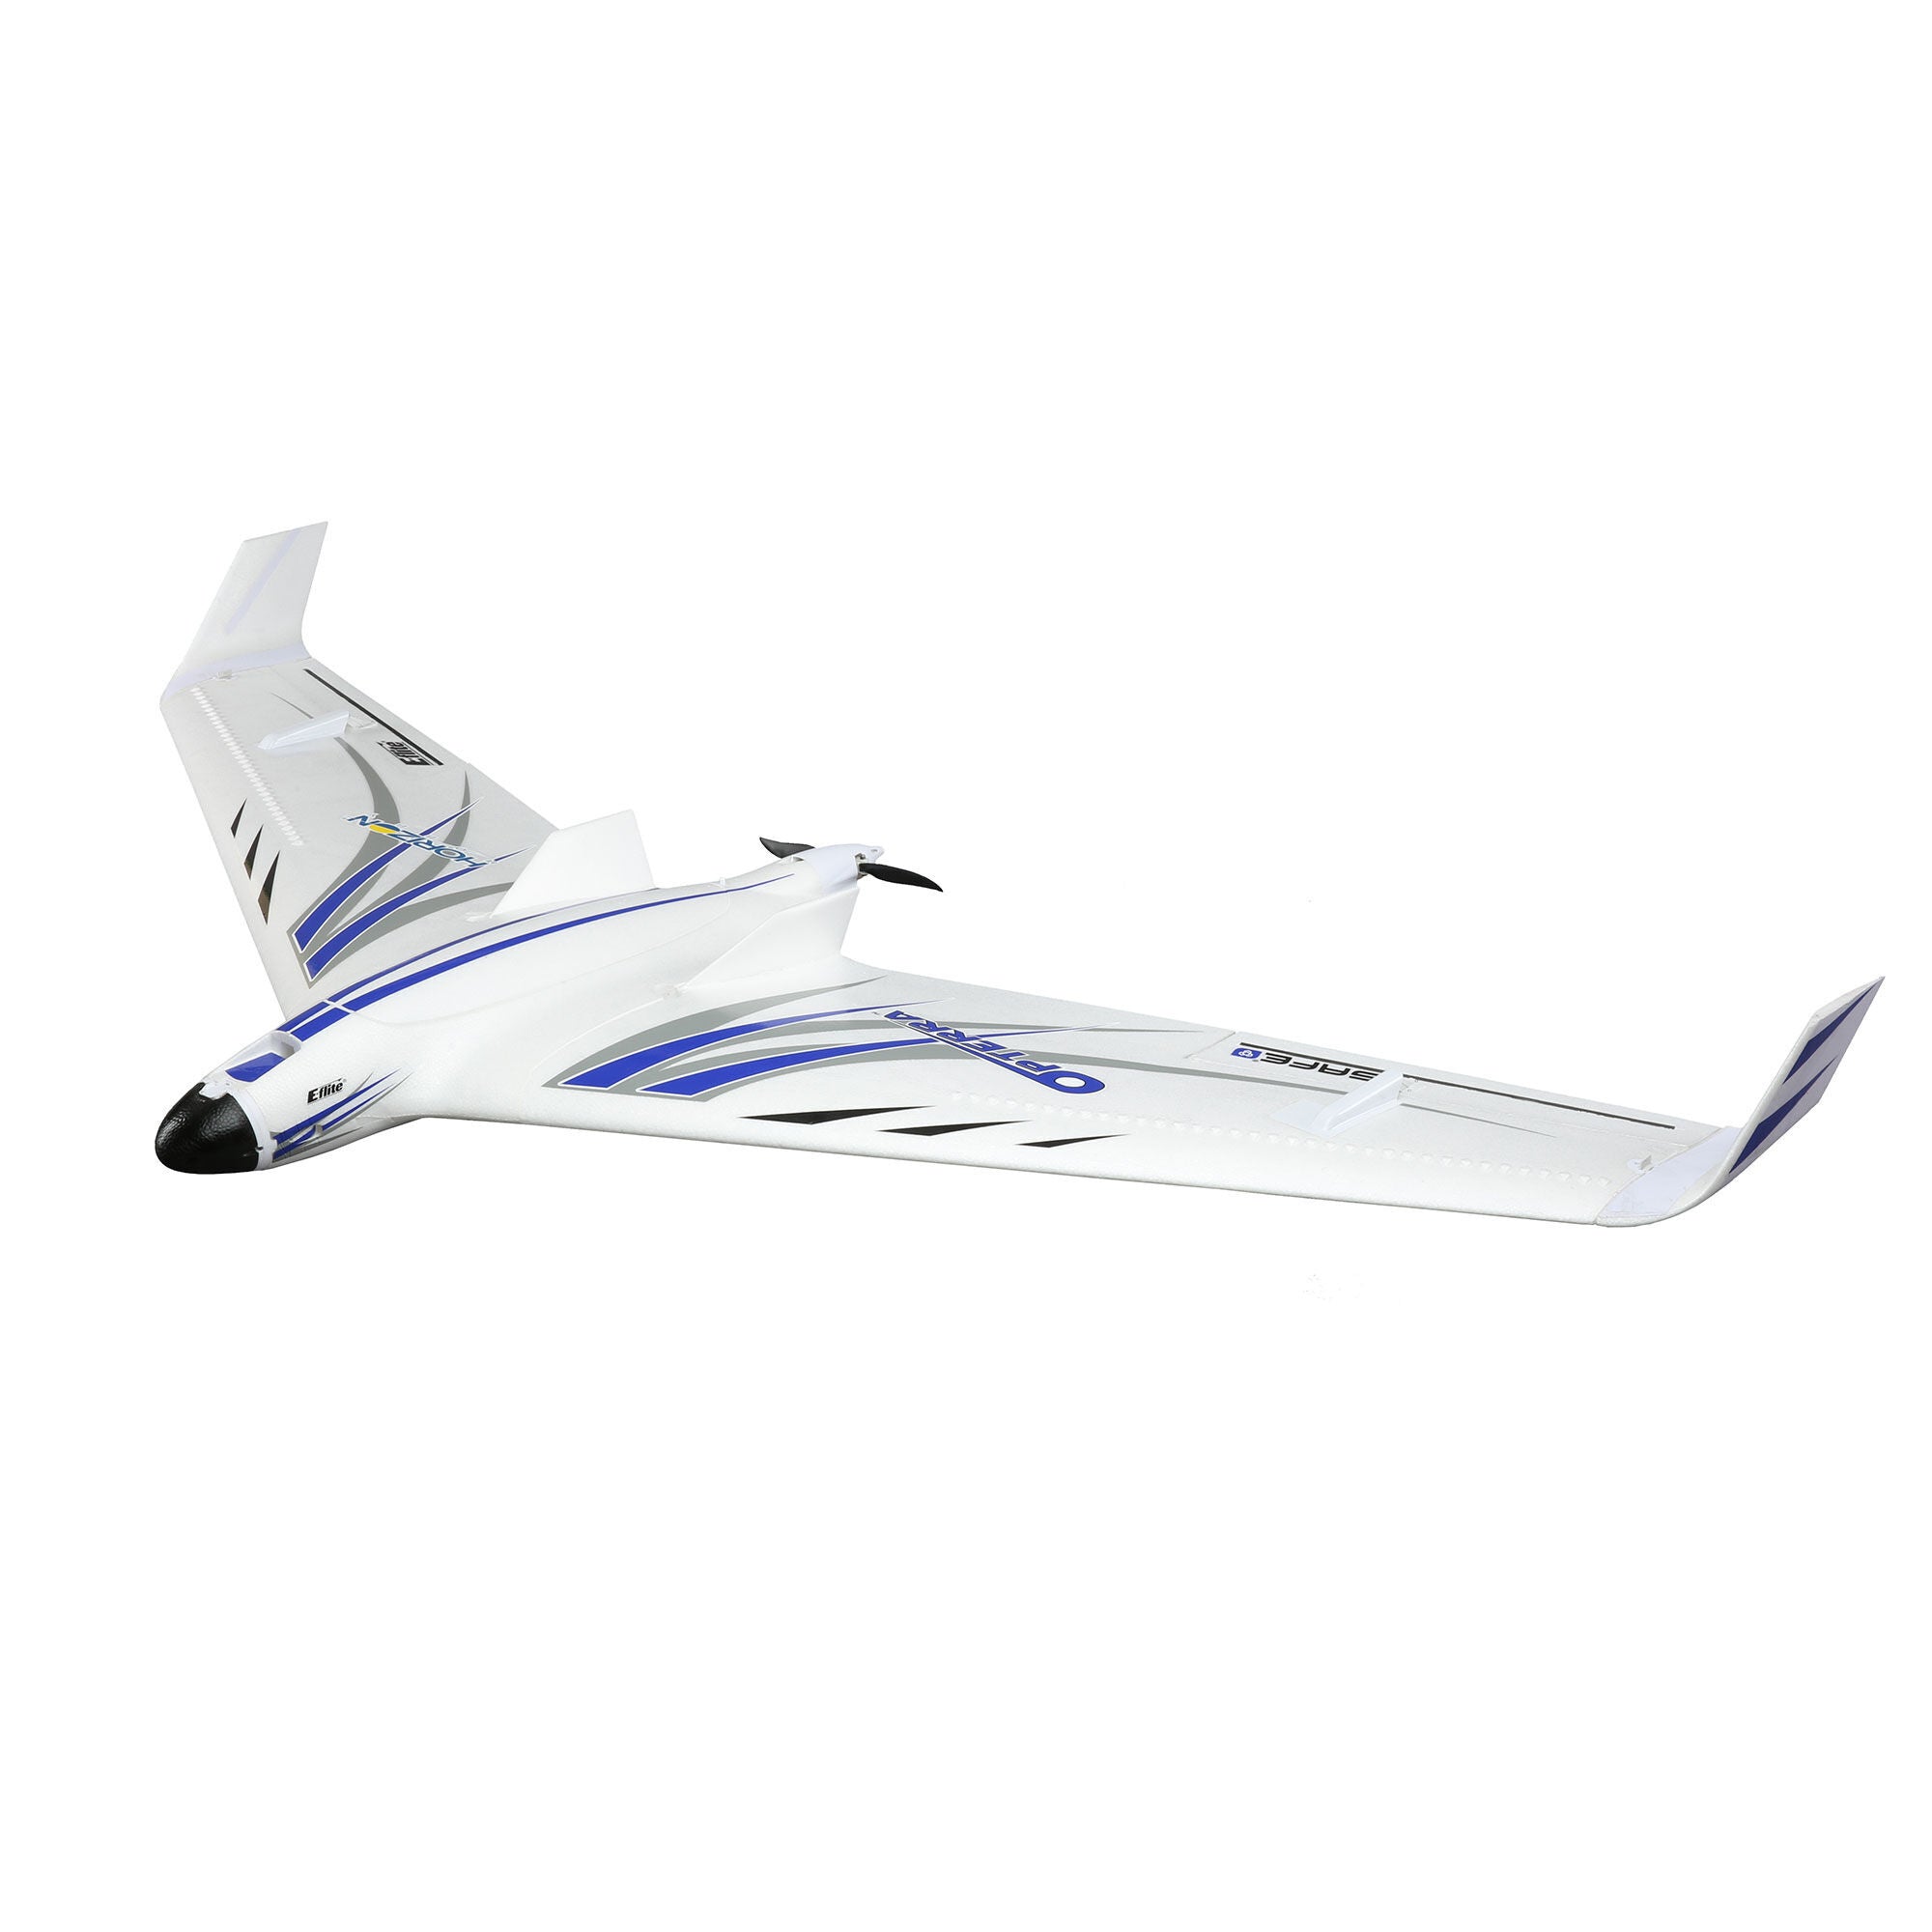 EFLITE EFL111500 Opterra 2m Wing BNF Basic with AS3X and SAFE Select